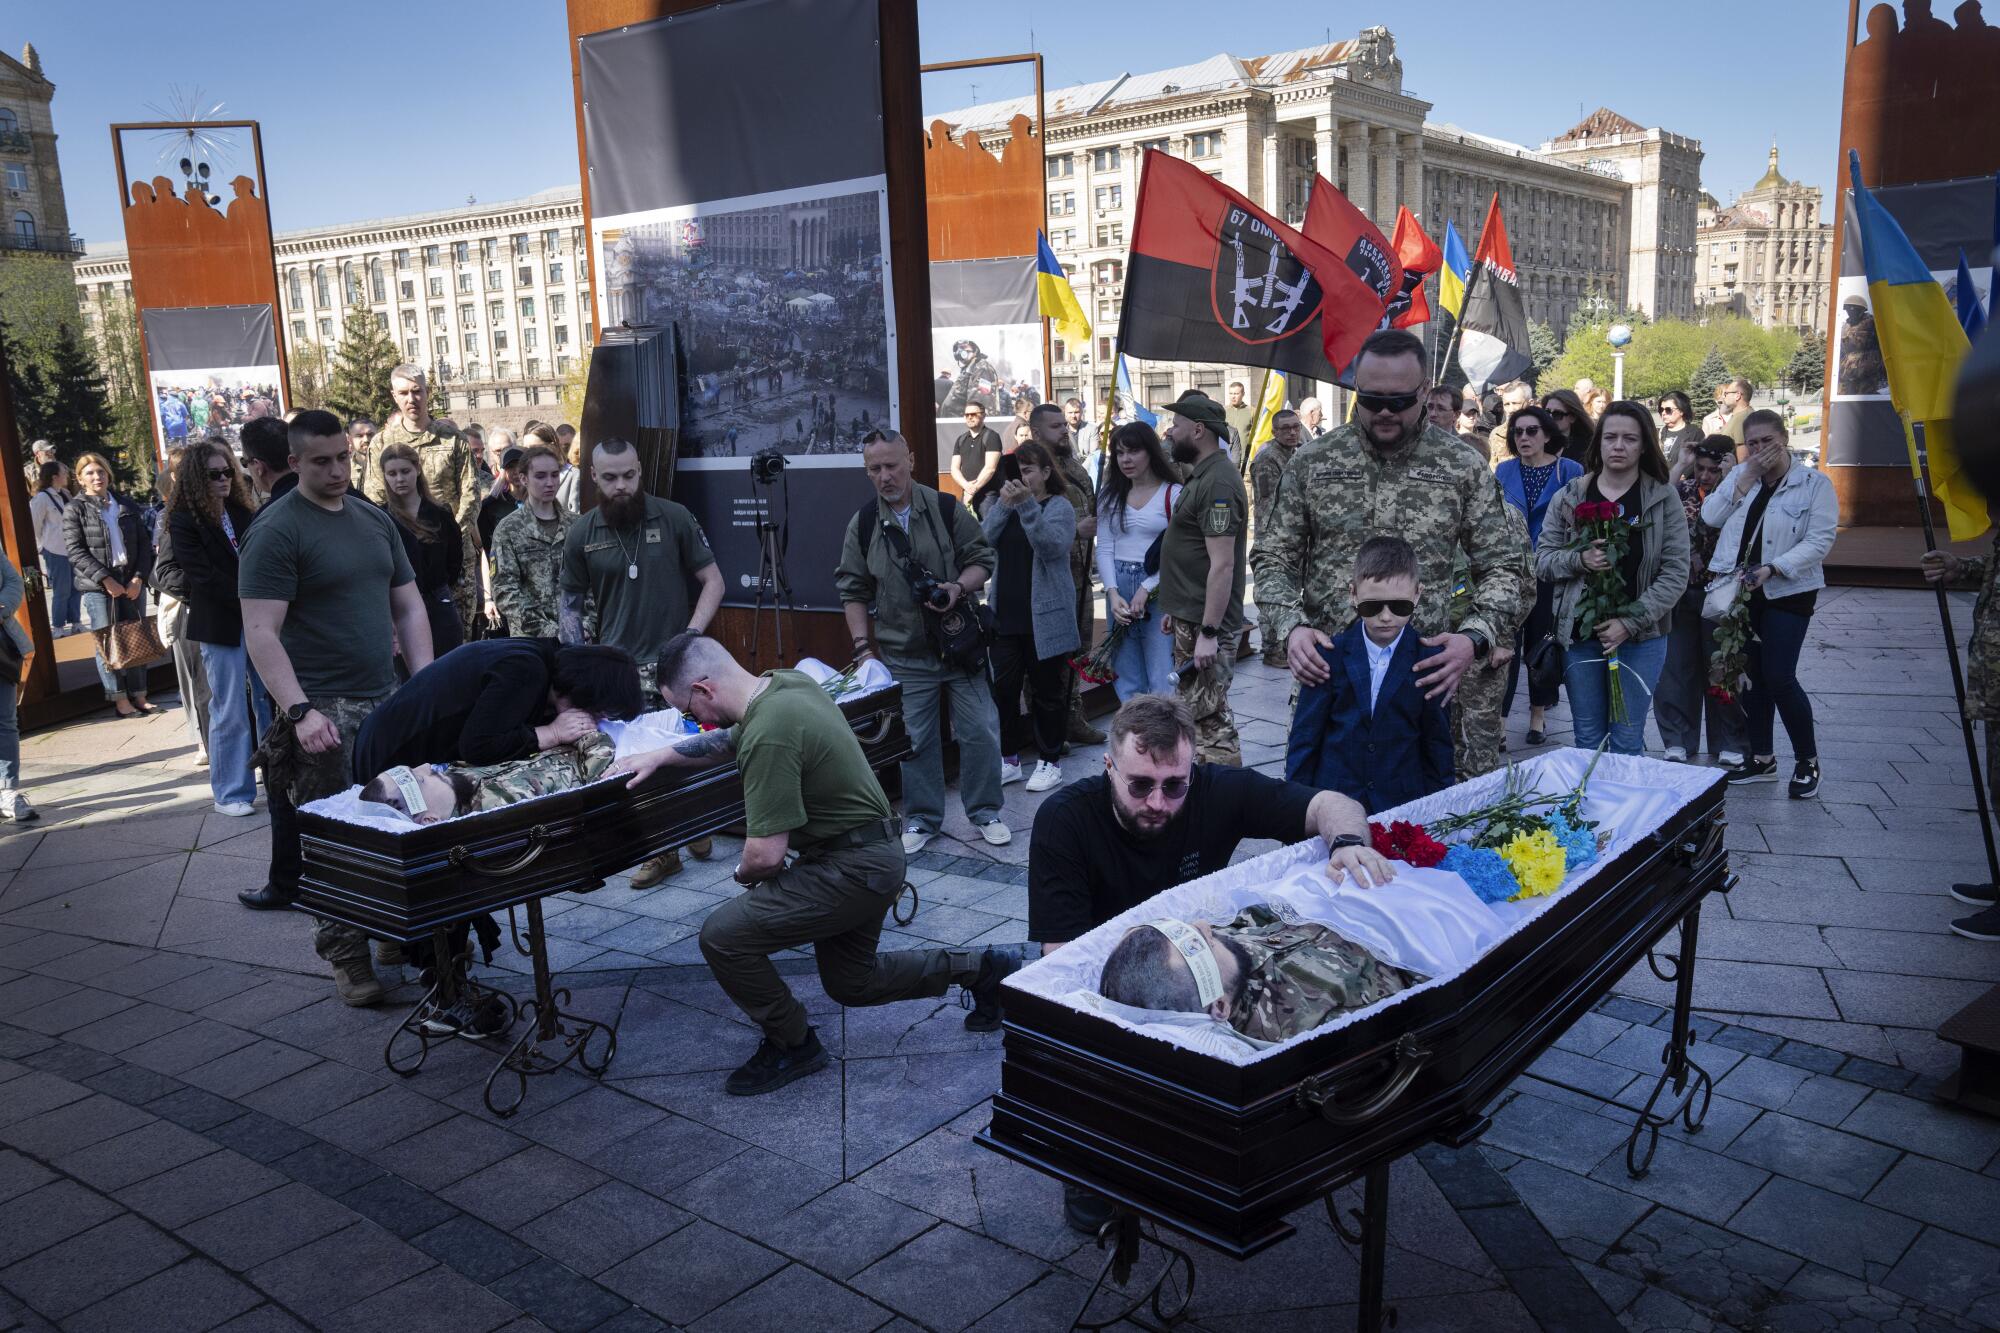 People stand and kneel by the bodies of two men in their coffins, with red-and-black flags nearby